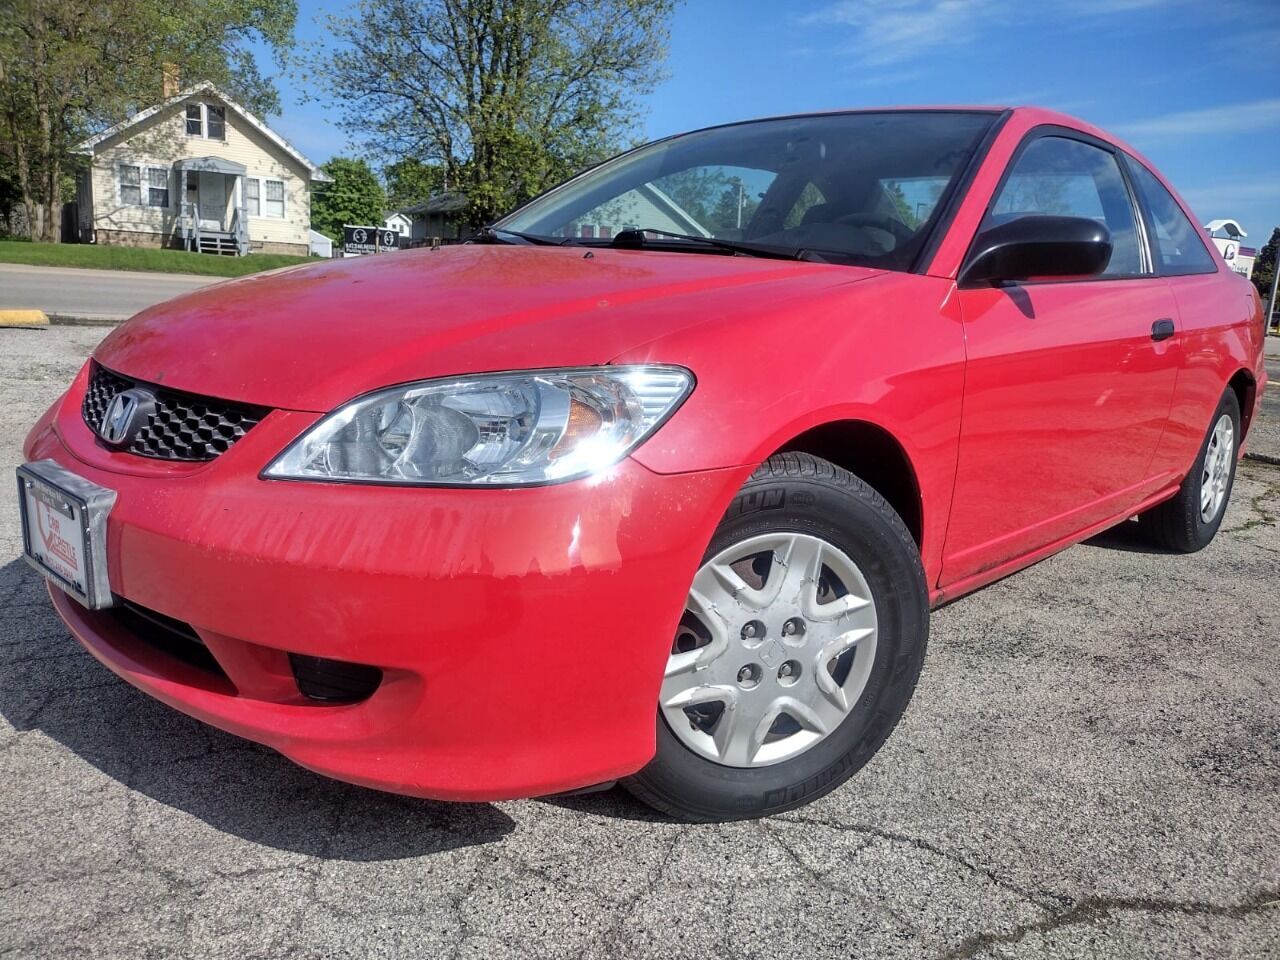 2004 Honda Civic Coupe Value Package